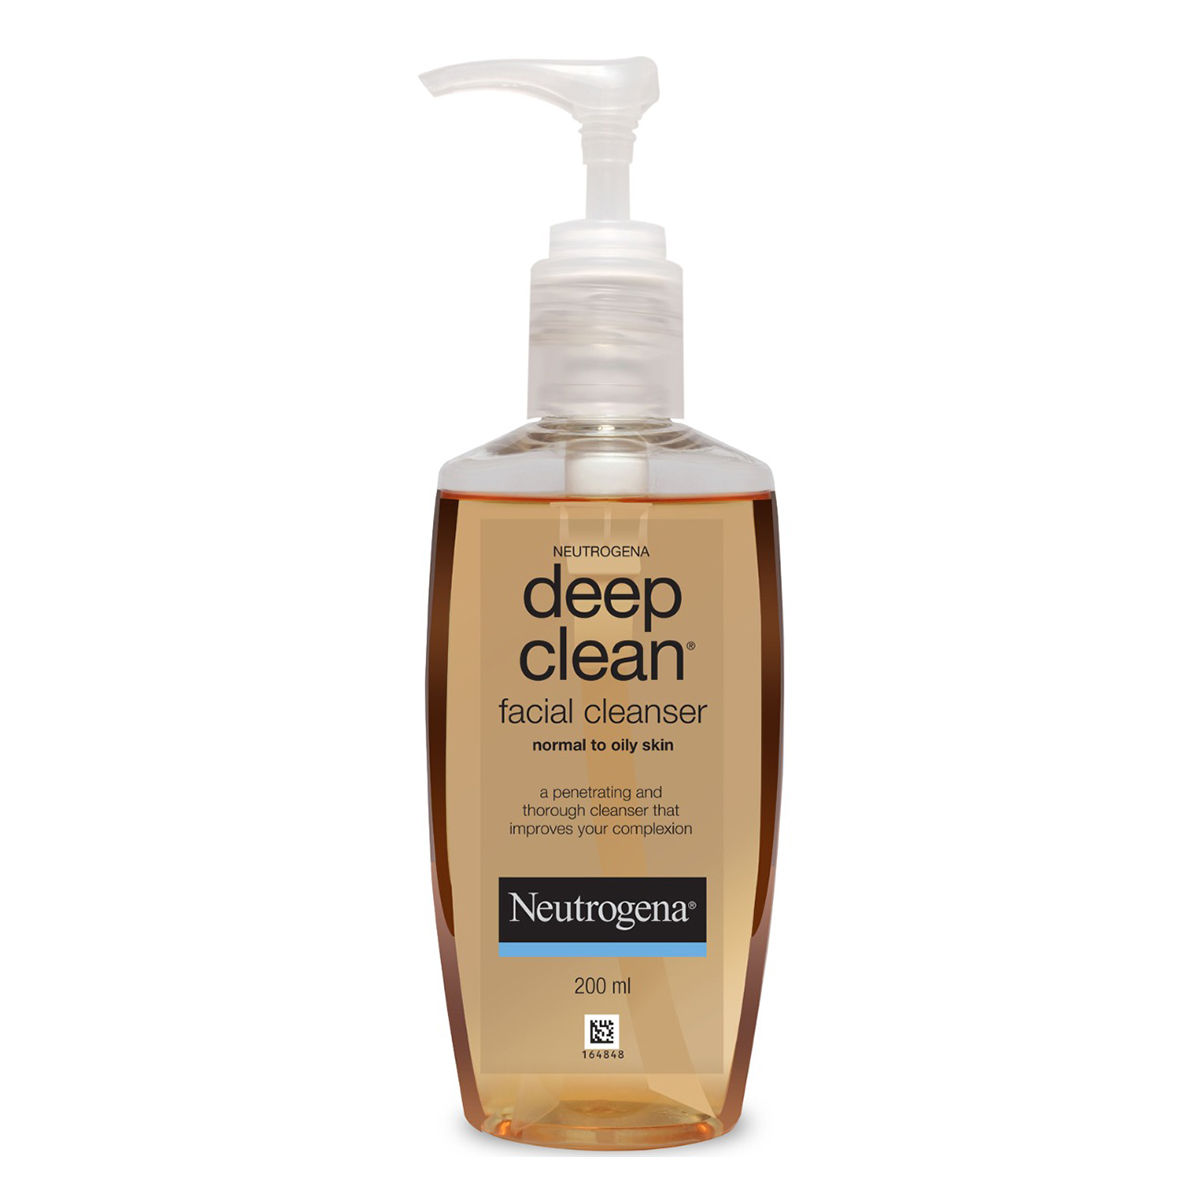 Buy Neutrogena Deep Clean Facial Cleanser For Normal to Oily Skin, 200 ml Online